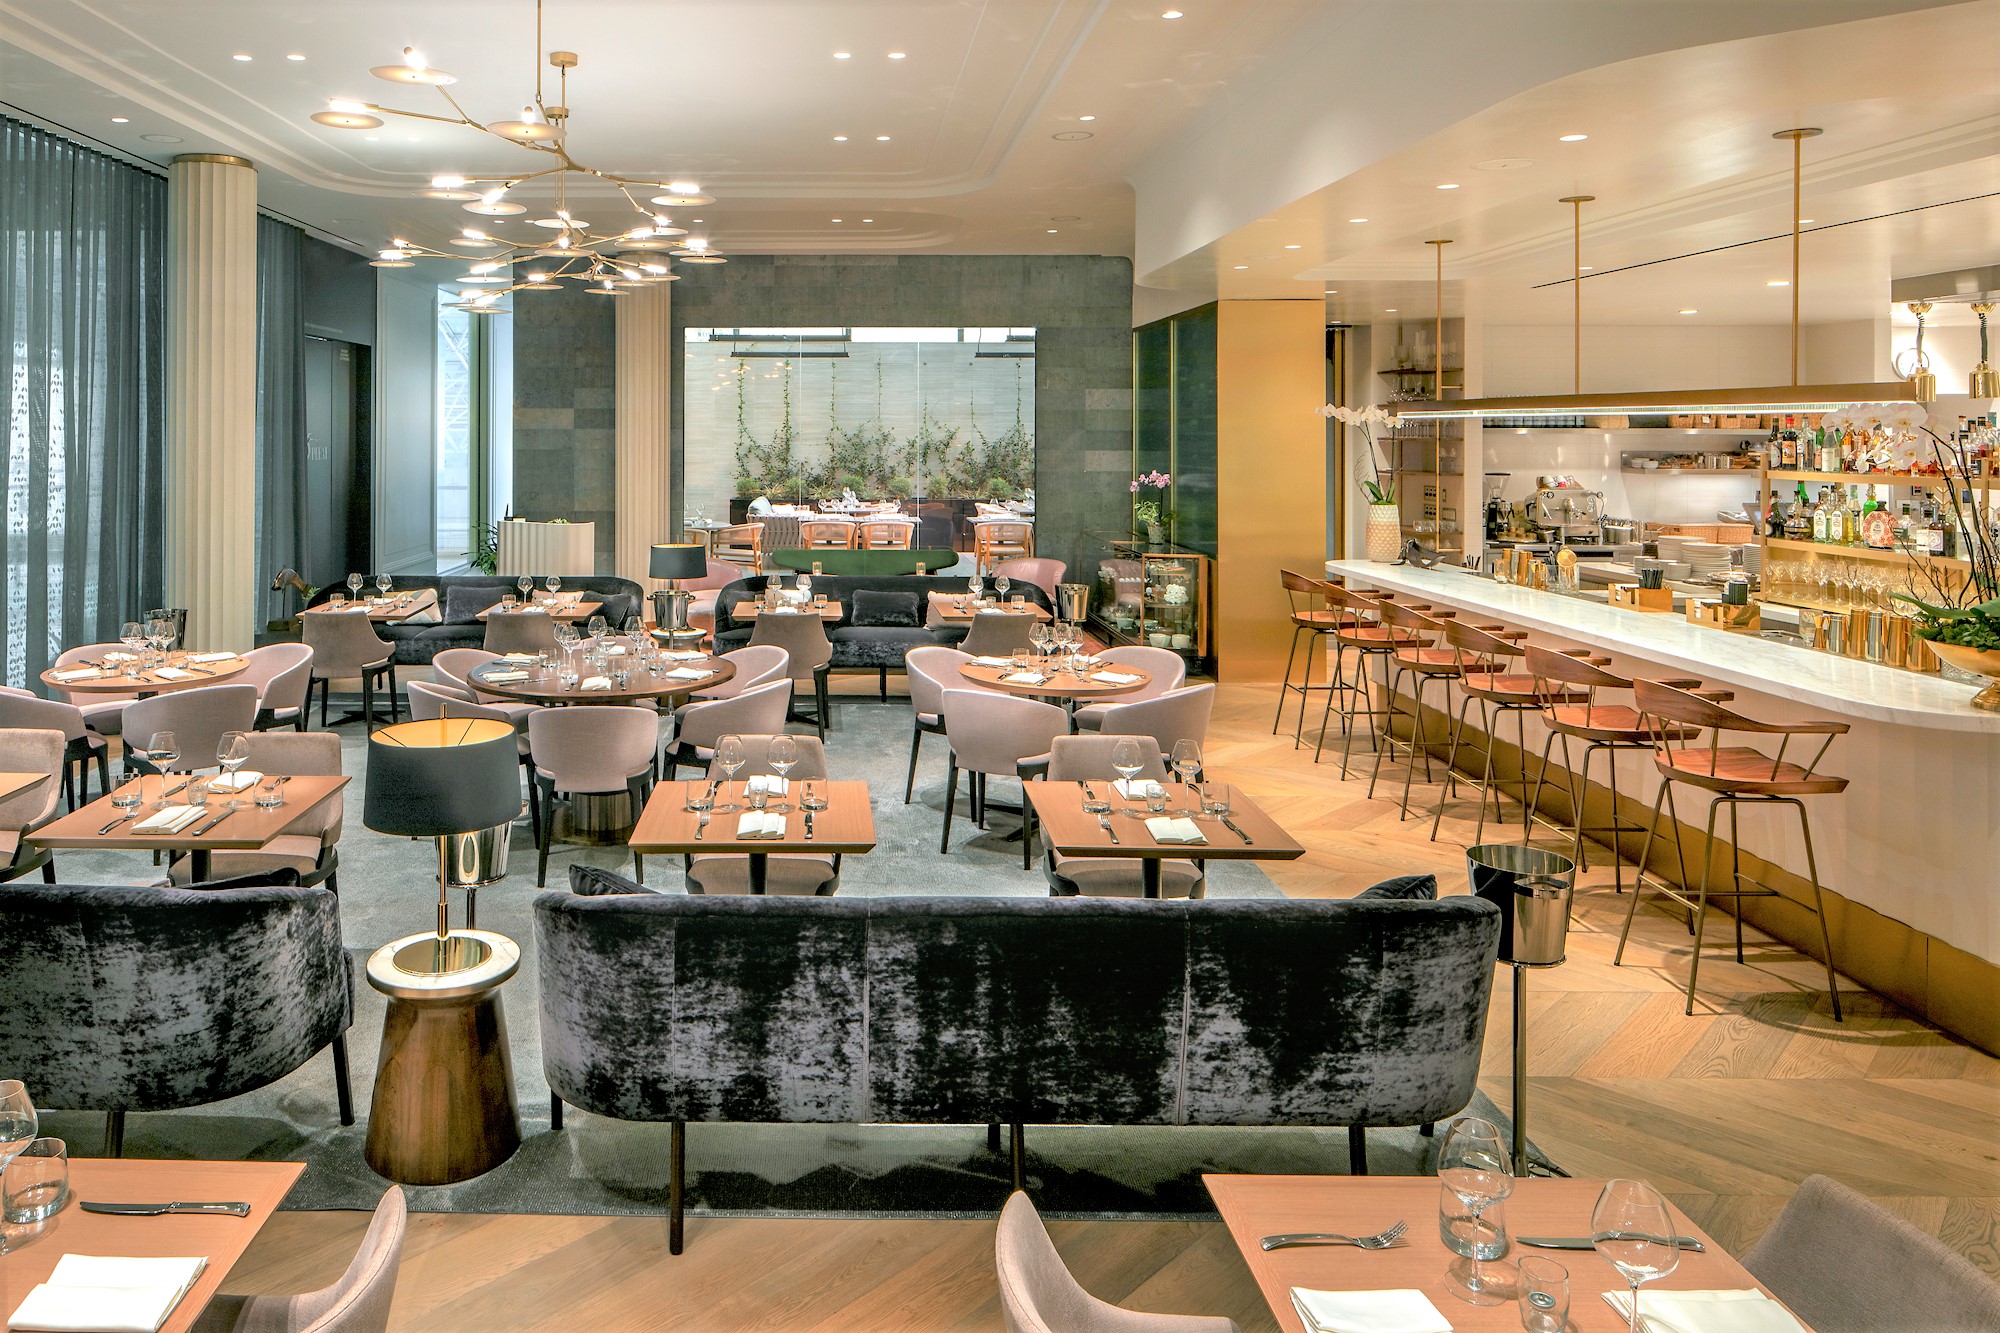 An upscale French restaurant dining room at daytime with plush seats and an open kitchen.